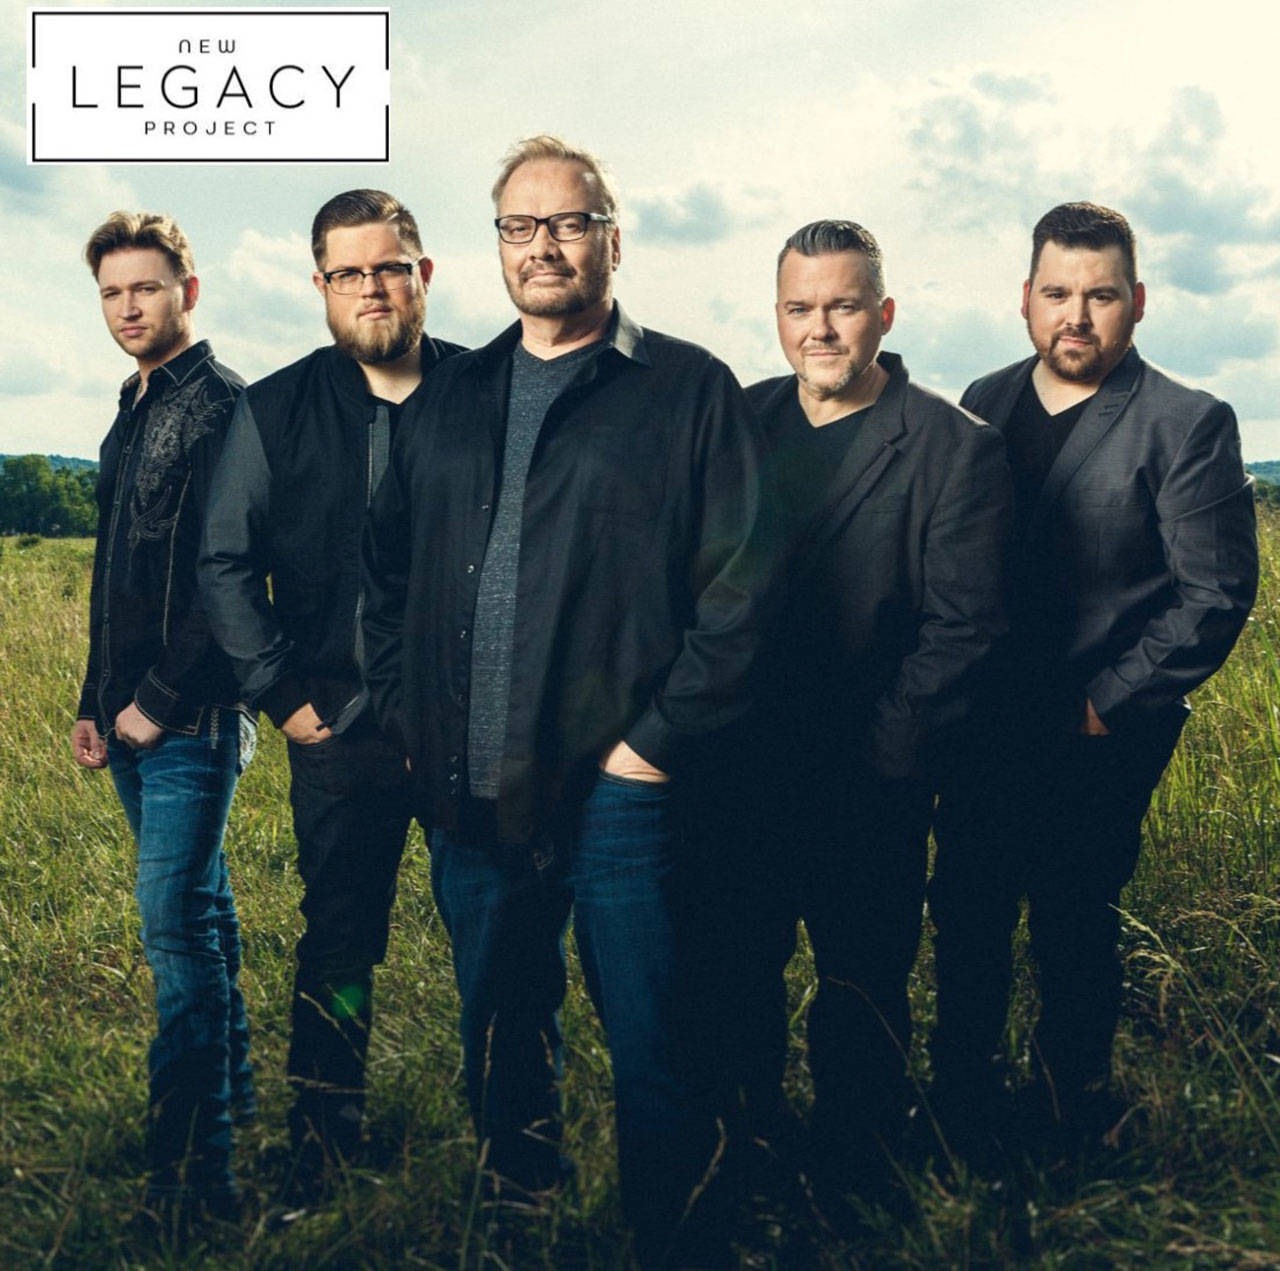 New Legacy Project blends an edgy Southern gospel sound with contemporary worship, while staying true to its calling. COURTESY PHOTO